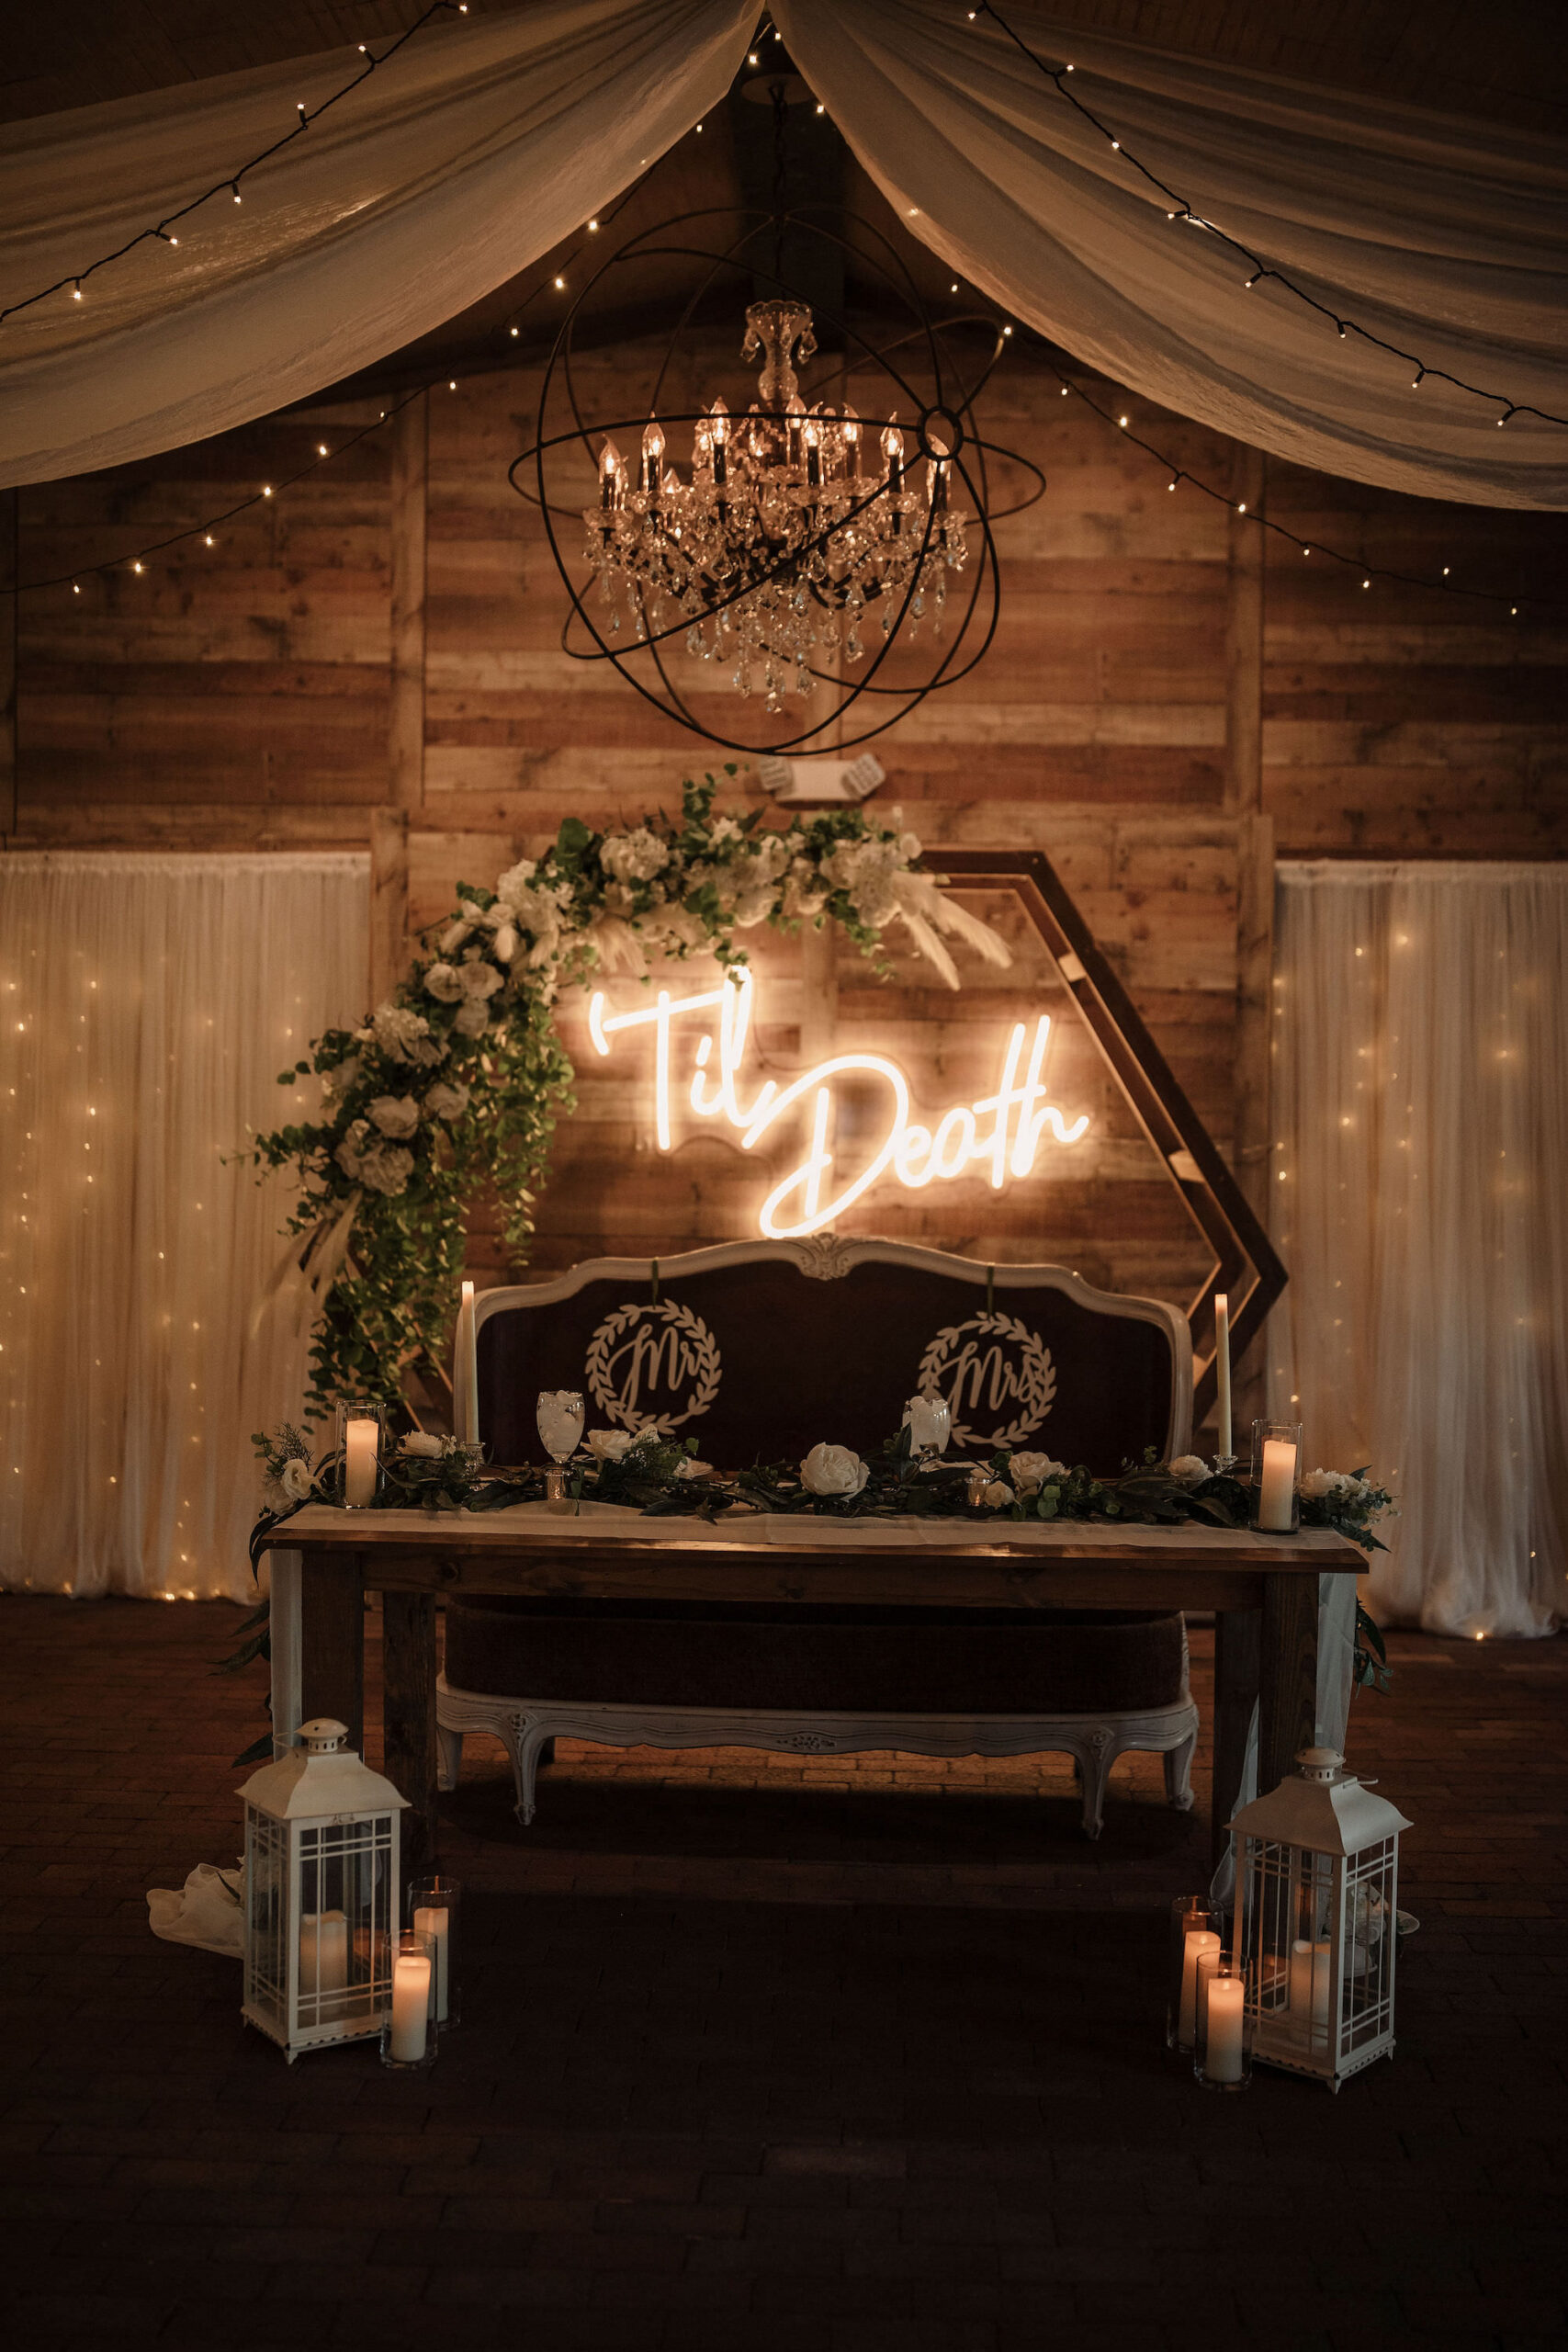 Wedding Reception Sweetheart Table With Hexagon Arch and White Flowers with Greenery and Pampas Grass Decor Ideas | Bench Seating | Personalized Neon Sign Ideas